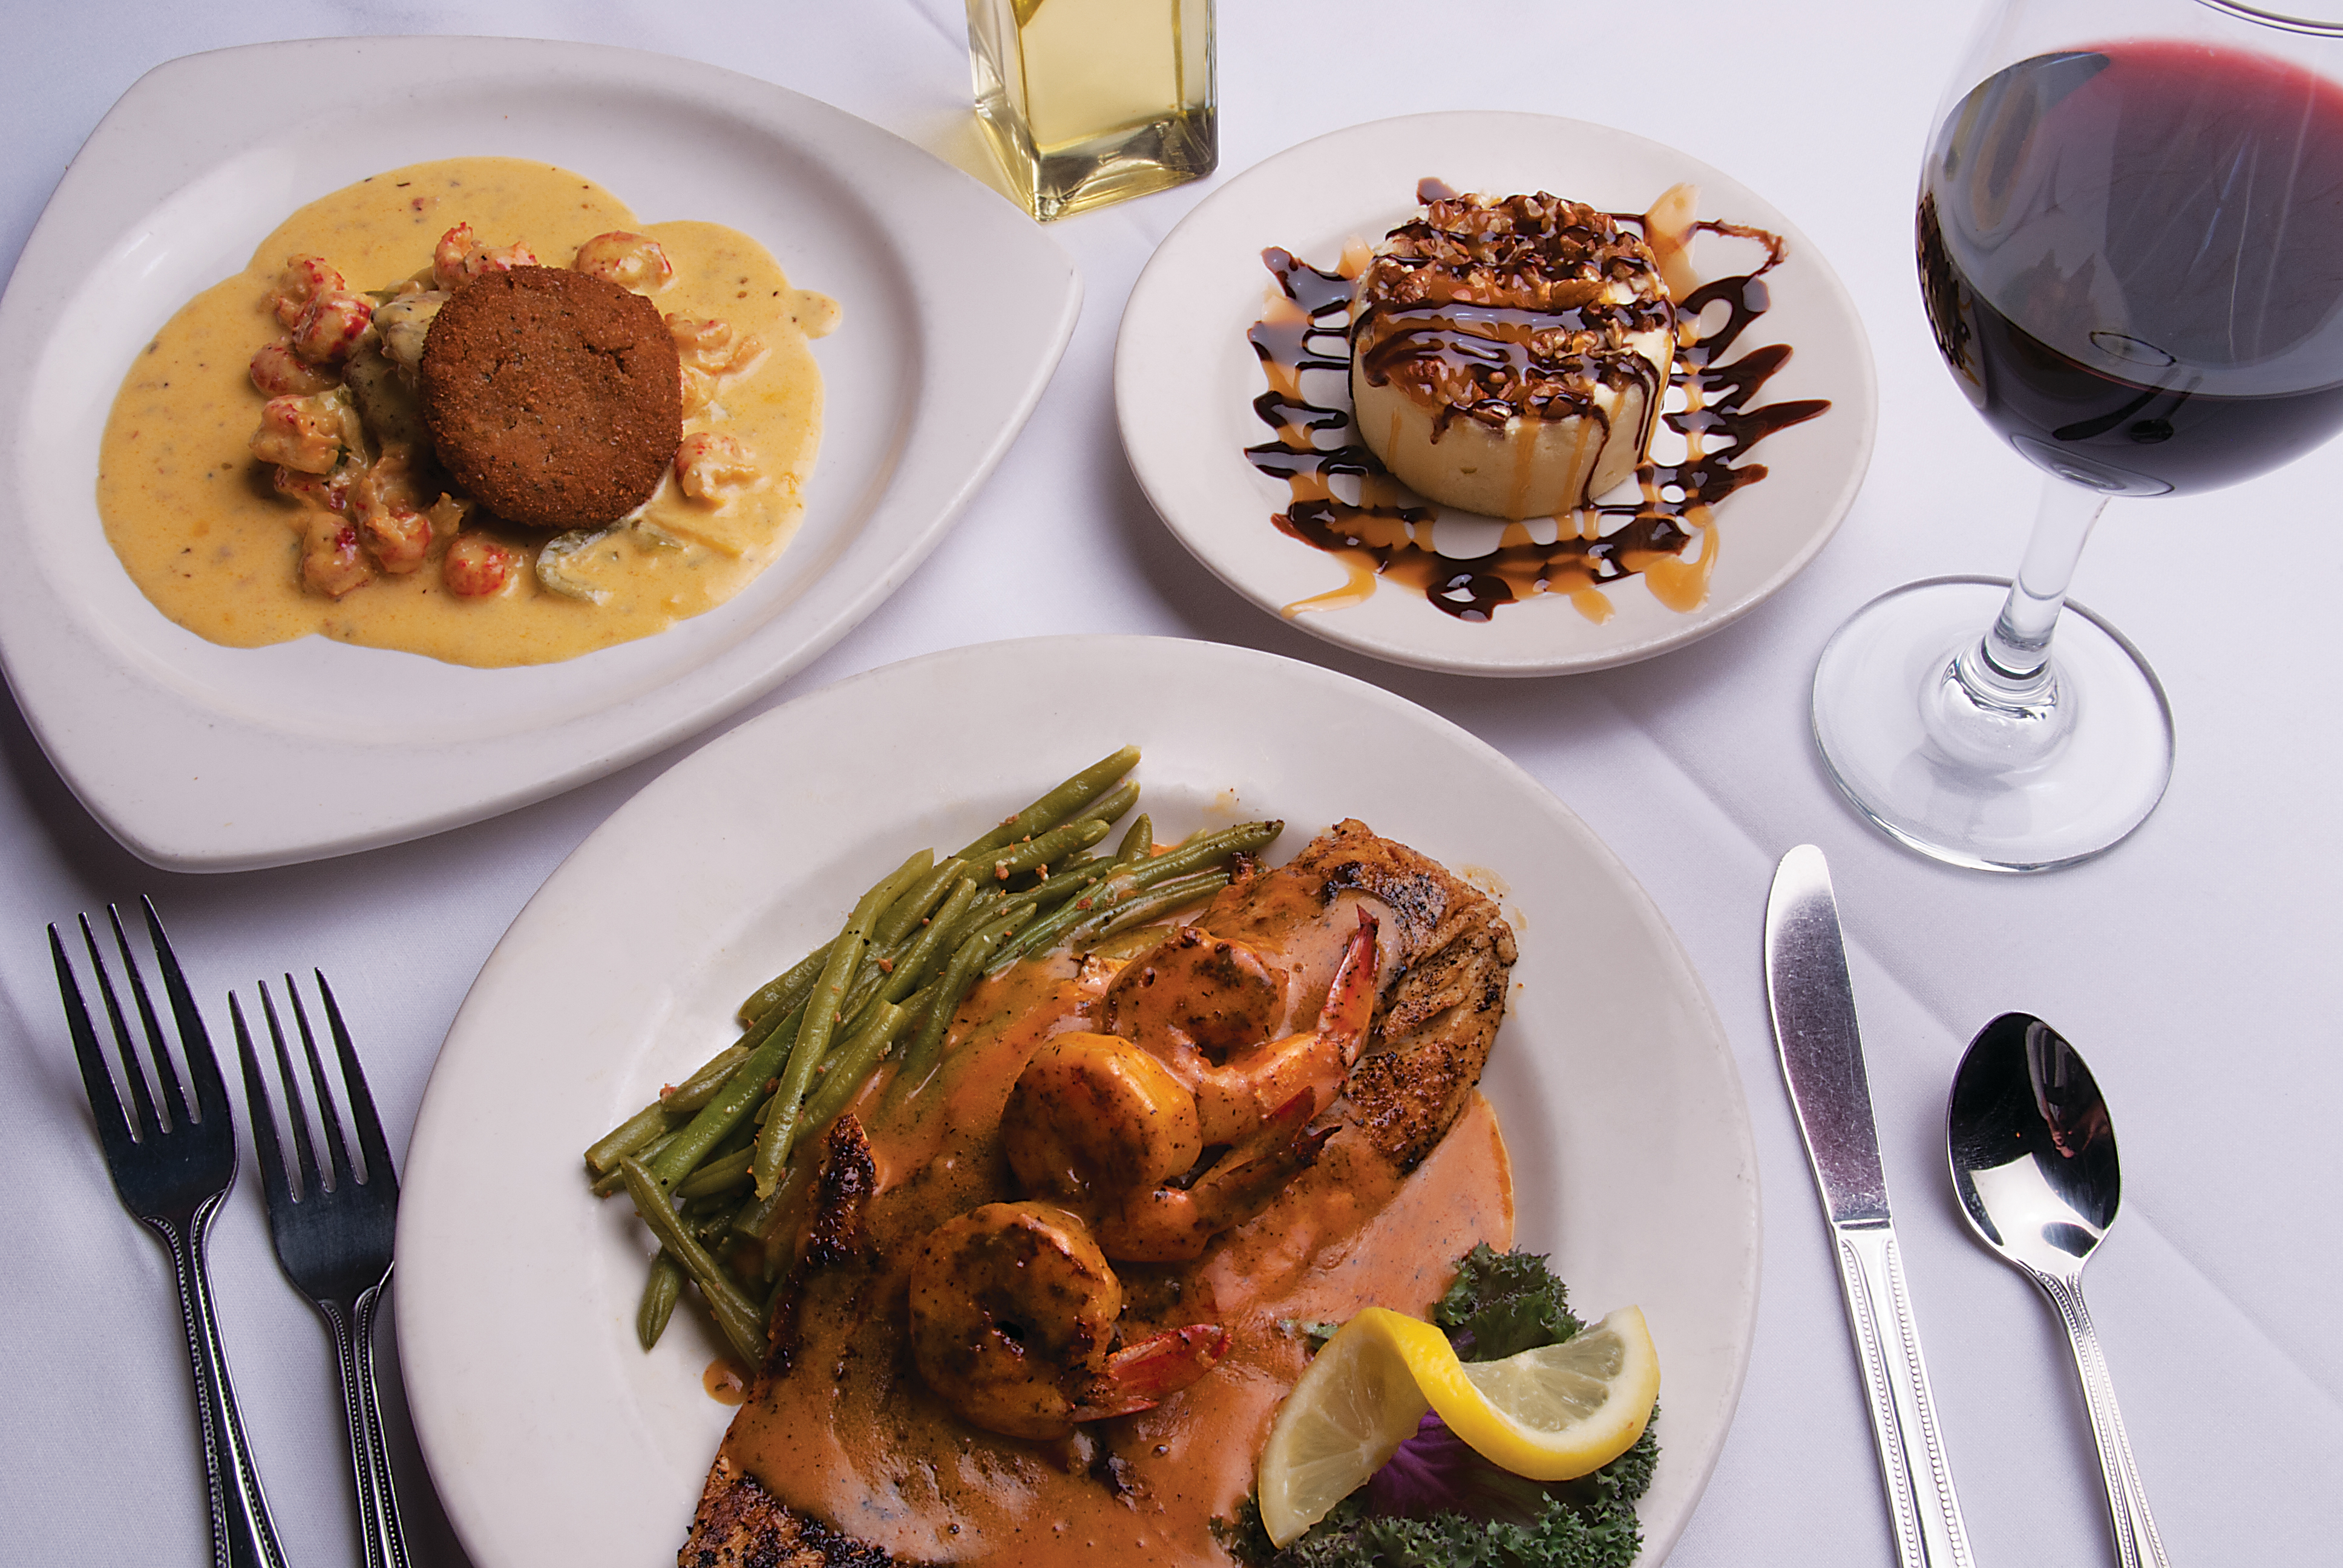 Gourmet dishes of seafood and chocolate. 